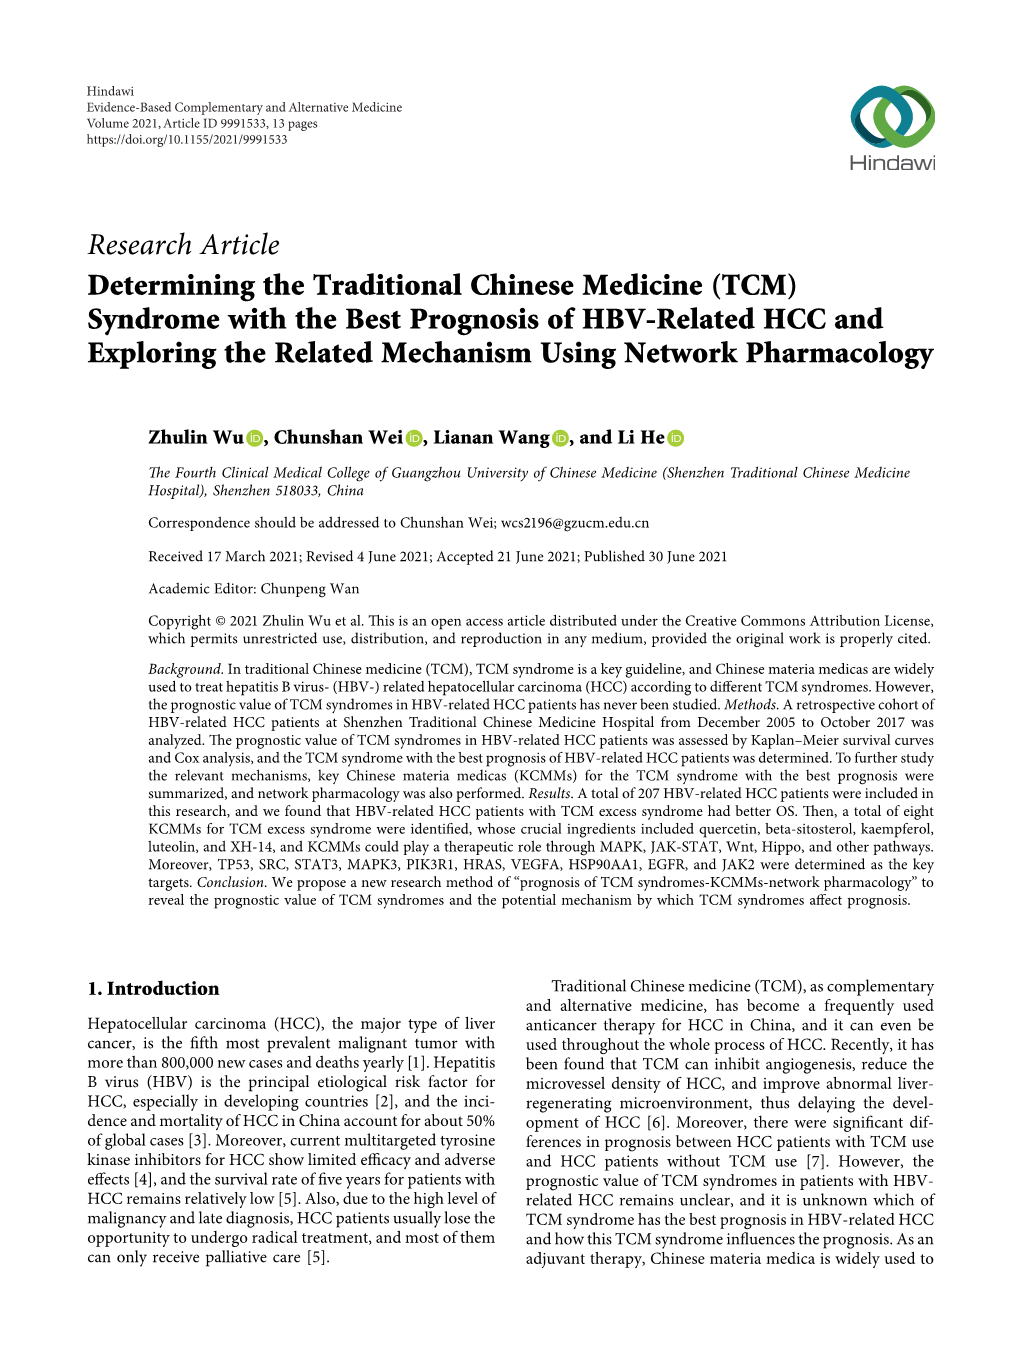 Research Article Determining the Traditional Chinese Medicine (TCM)